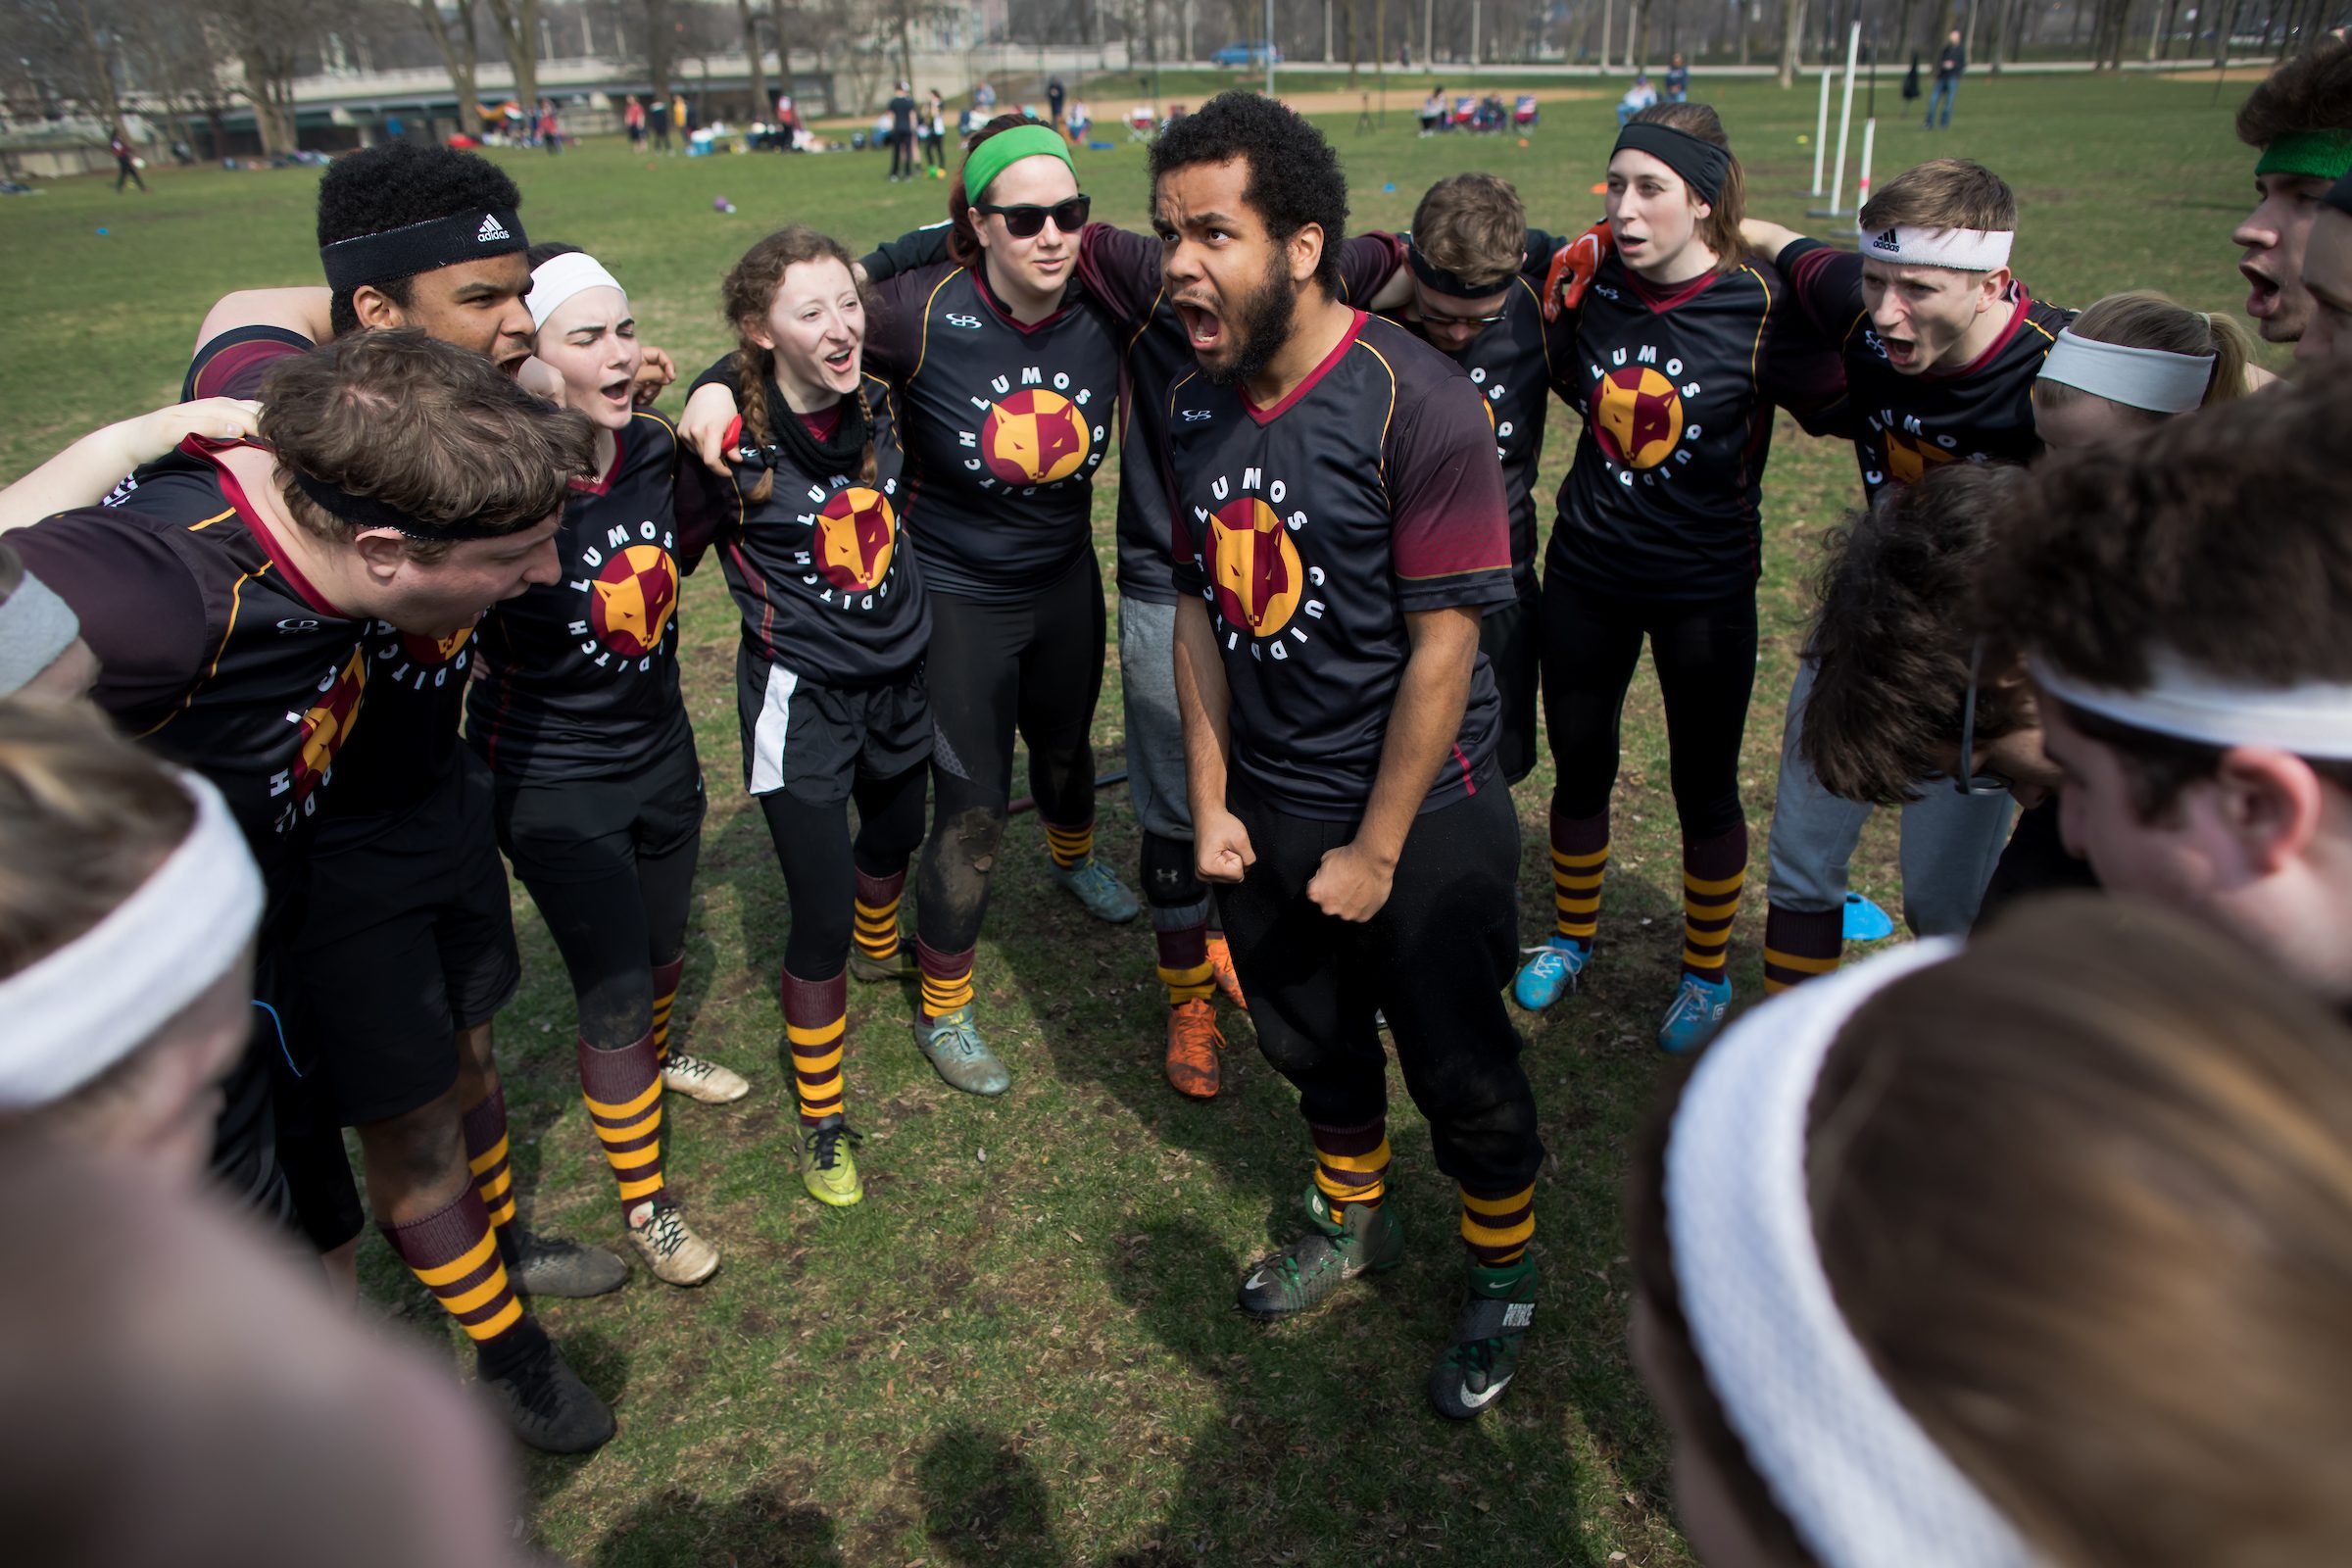 Loyola University Chicago's Quidditch team competes against the University of Iowa in a tournament in Grant Park on April 6, 2019. (Photo: Lukas Keapproth)